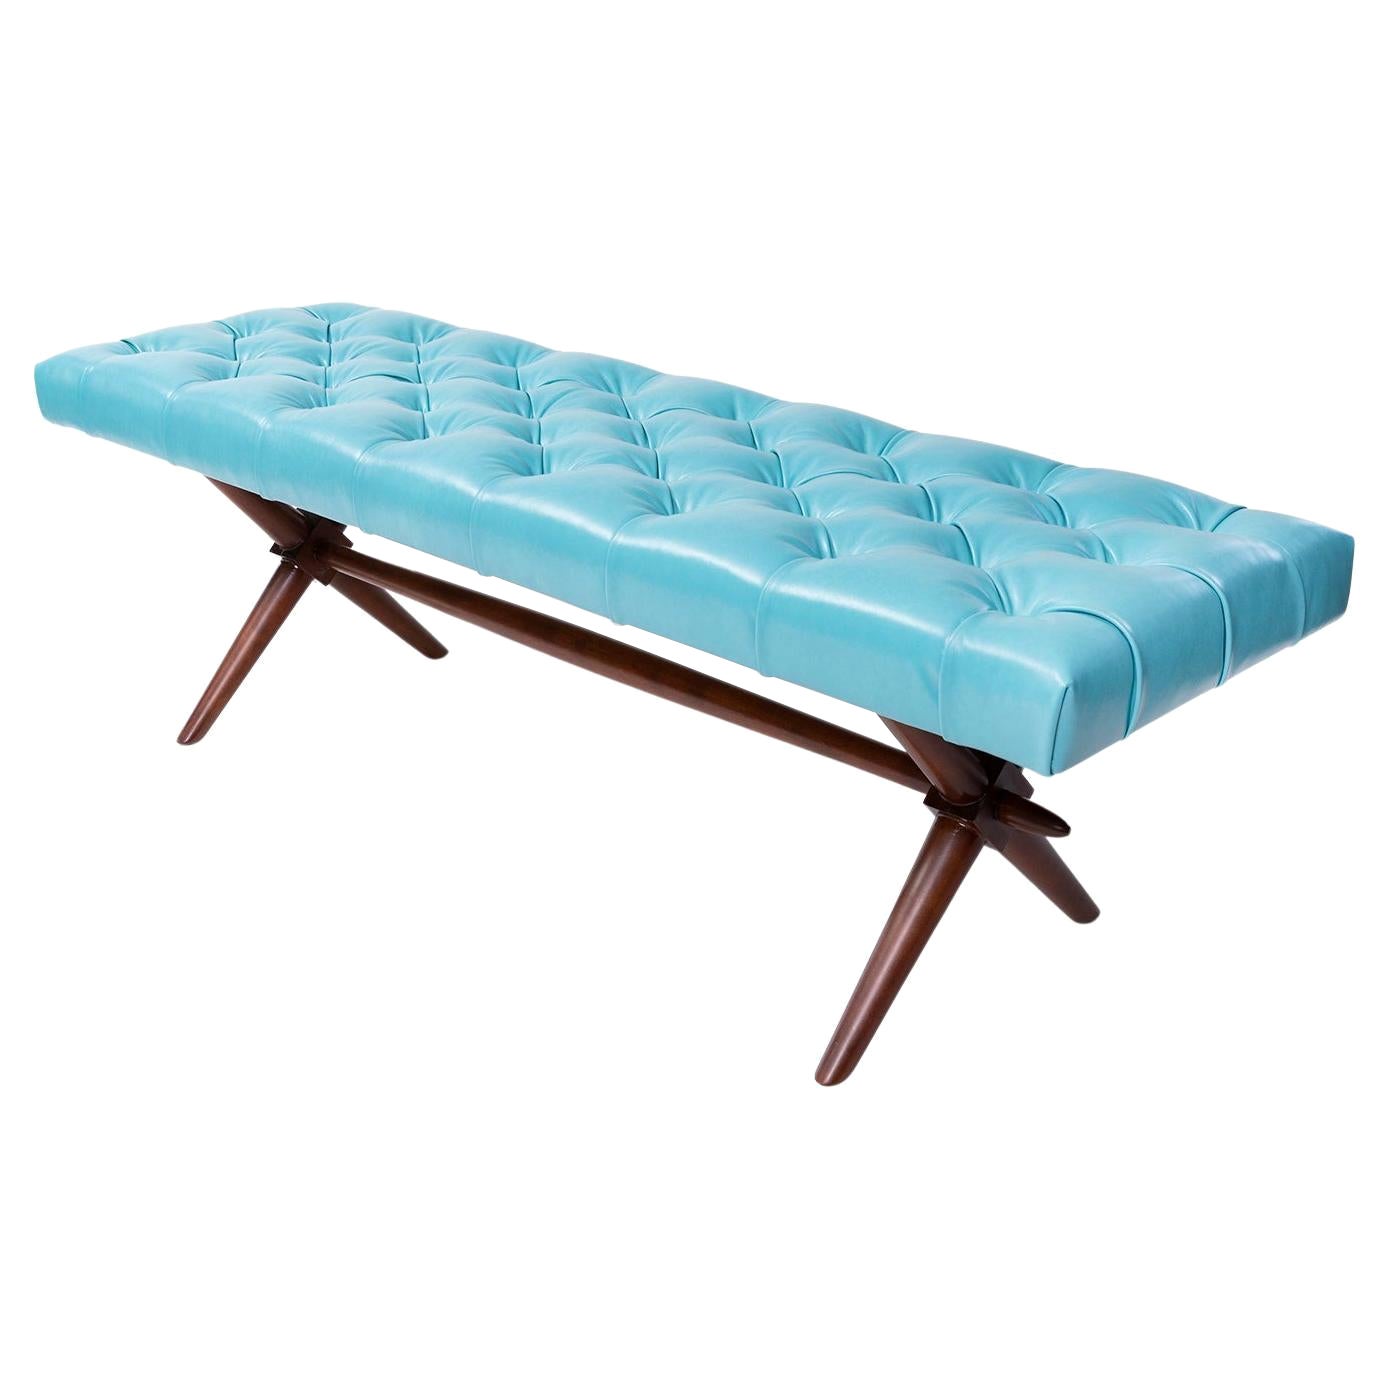 Gibbings 1950s Button-Tufted Turquoise Leather & Mahogany Bench